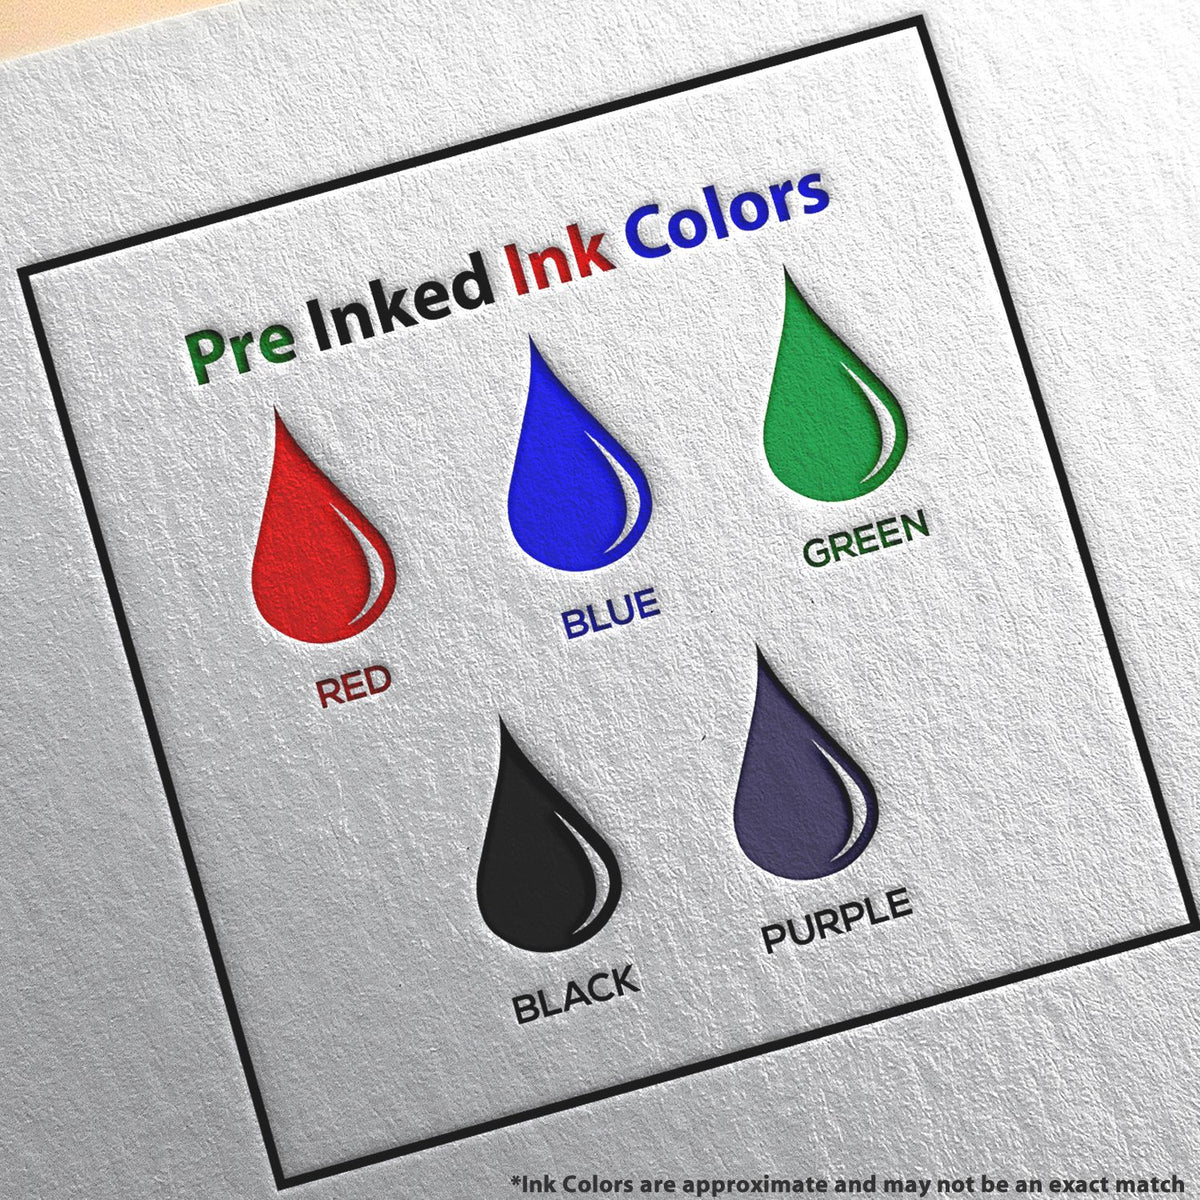 A picture showing the different ink colors or hues available for the Slim Pre-Inked Wisconsin Professional Geologist Seal Stamp